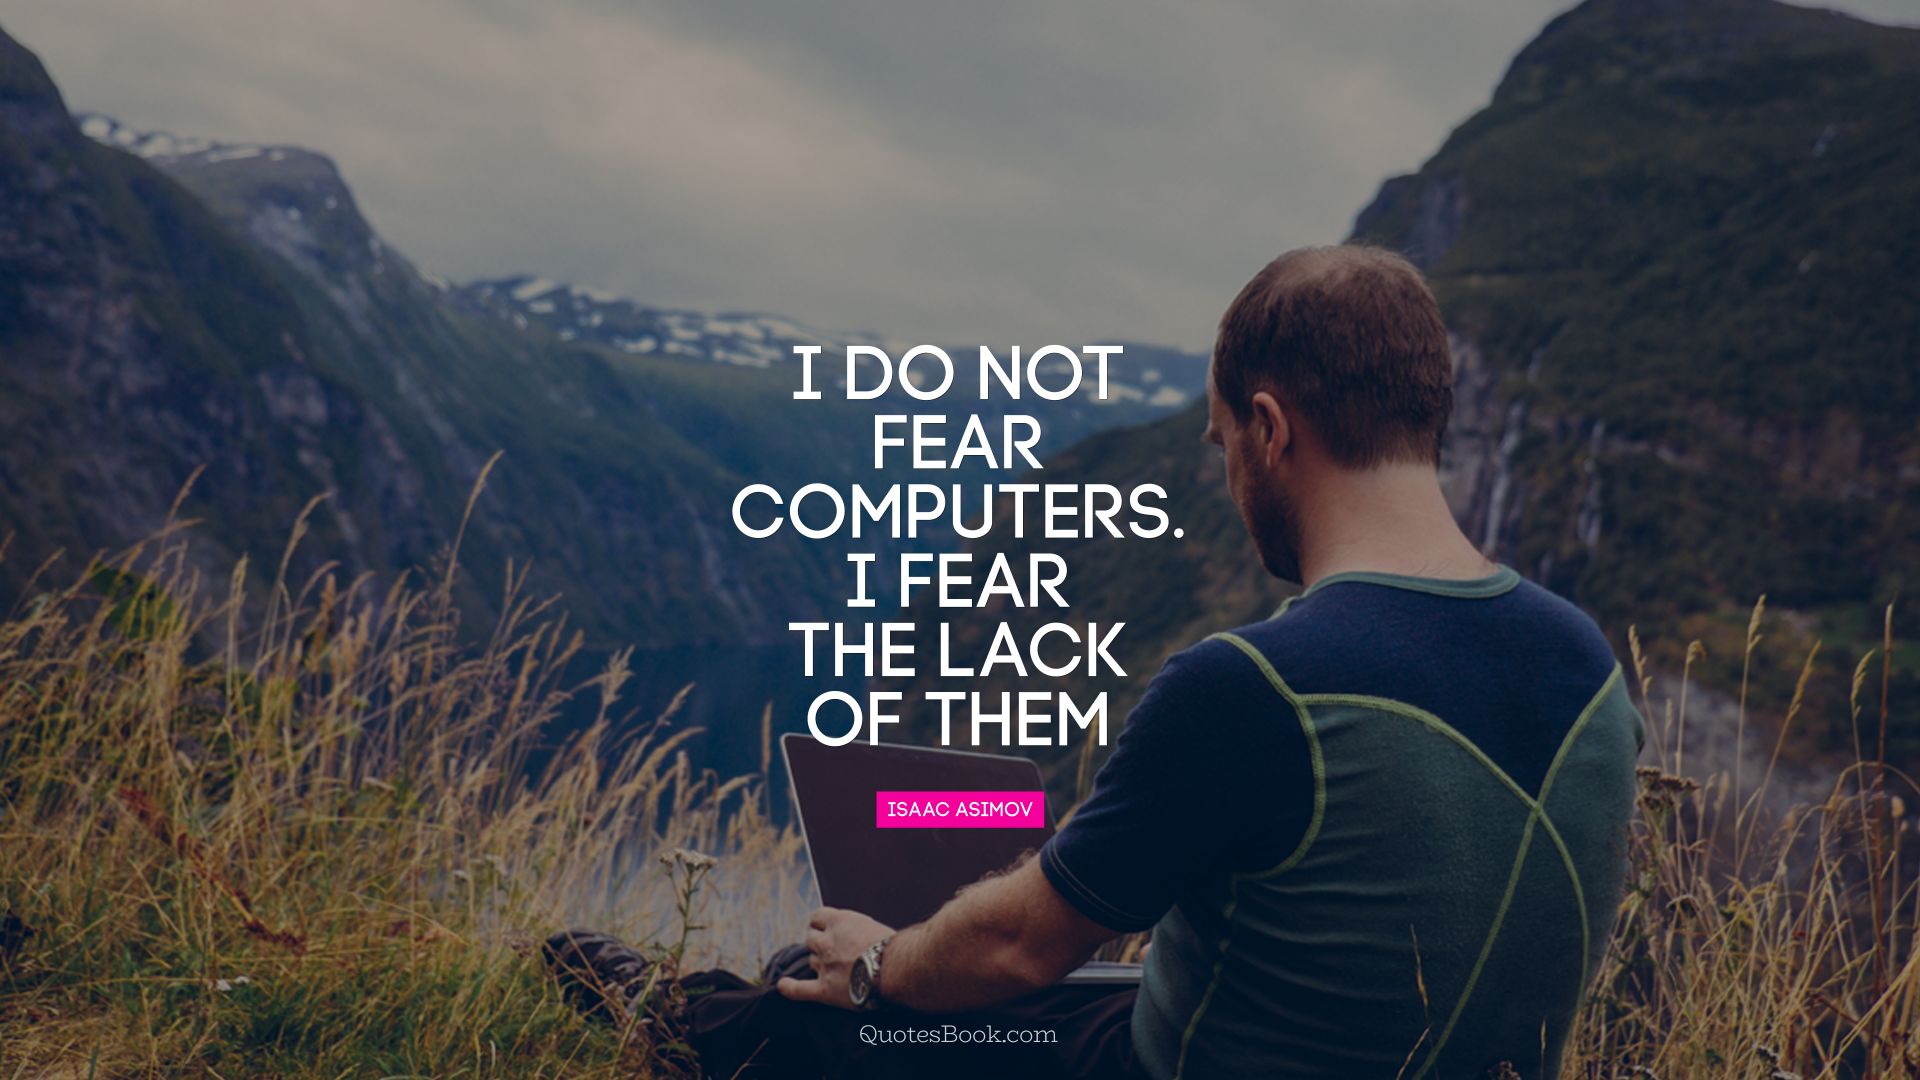 I do not fear computers. I fear the lack of them. - Quote by Isaac Asimov